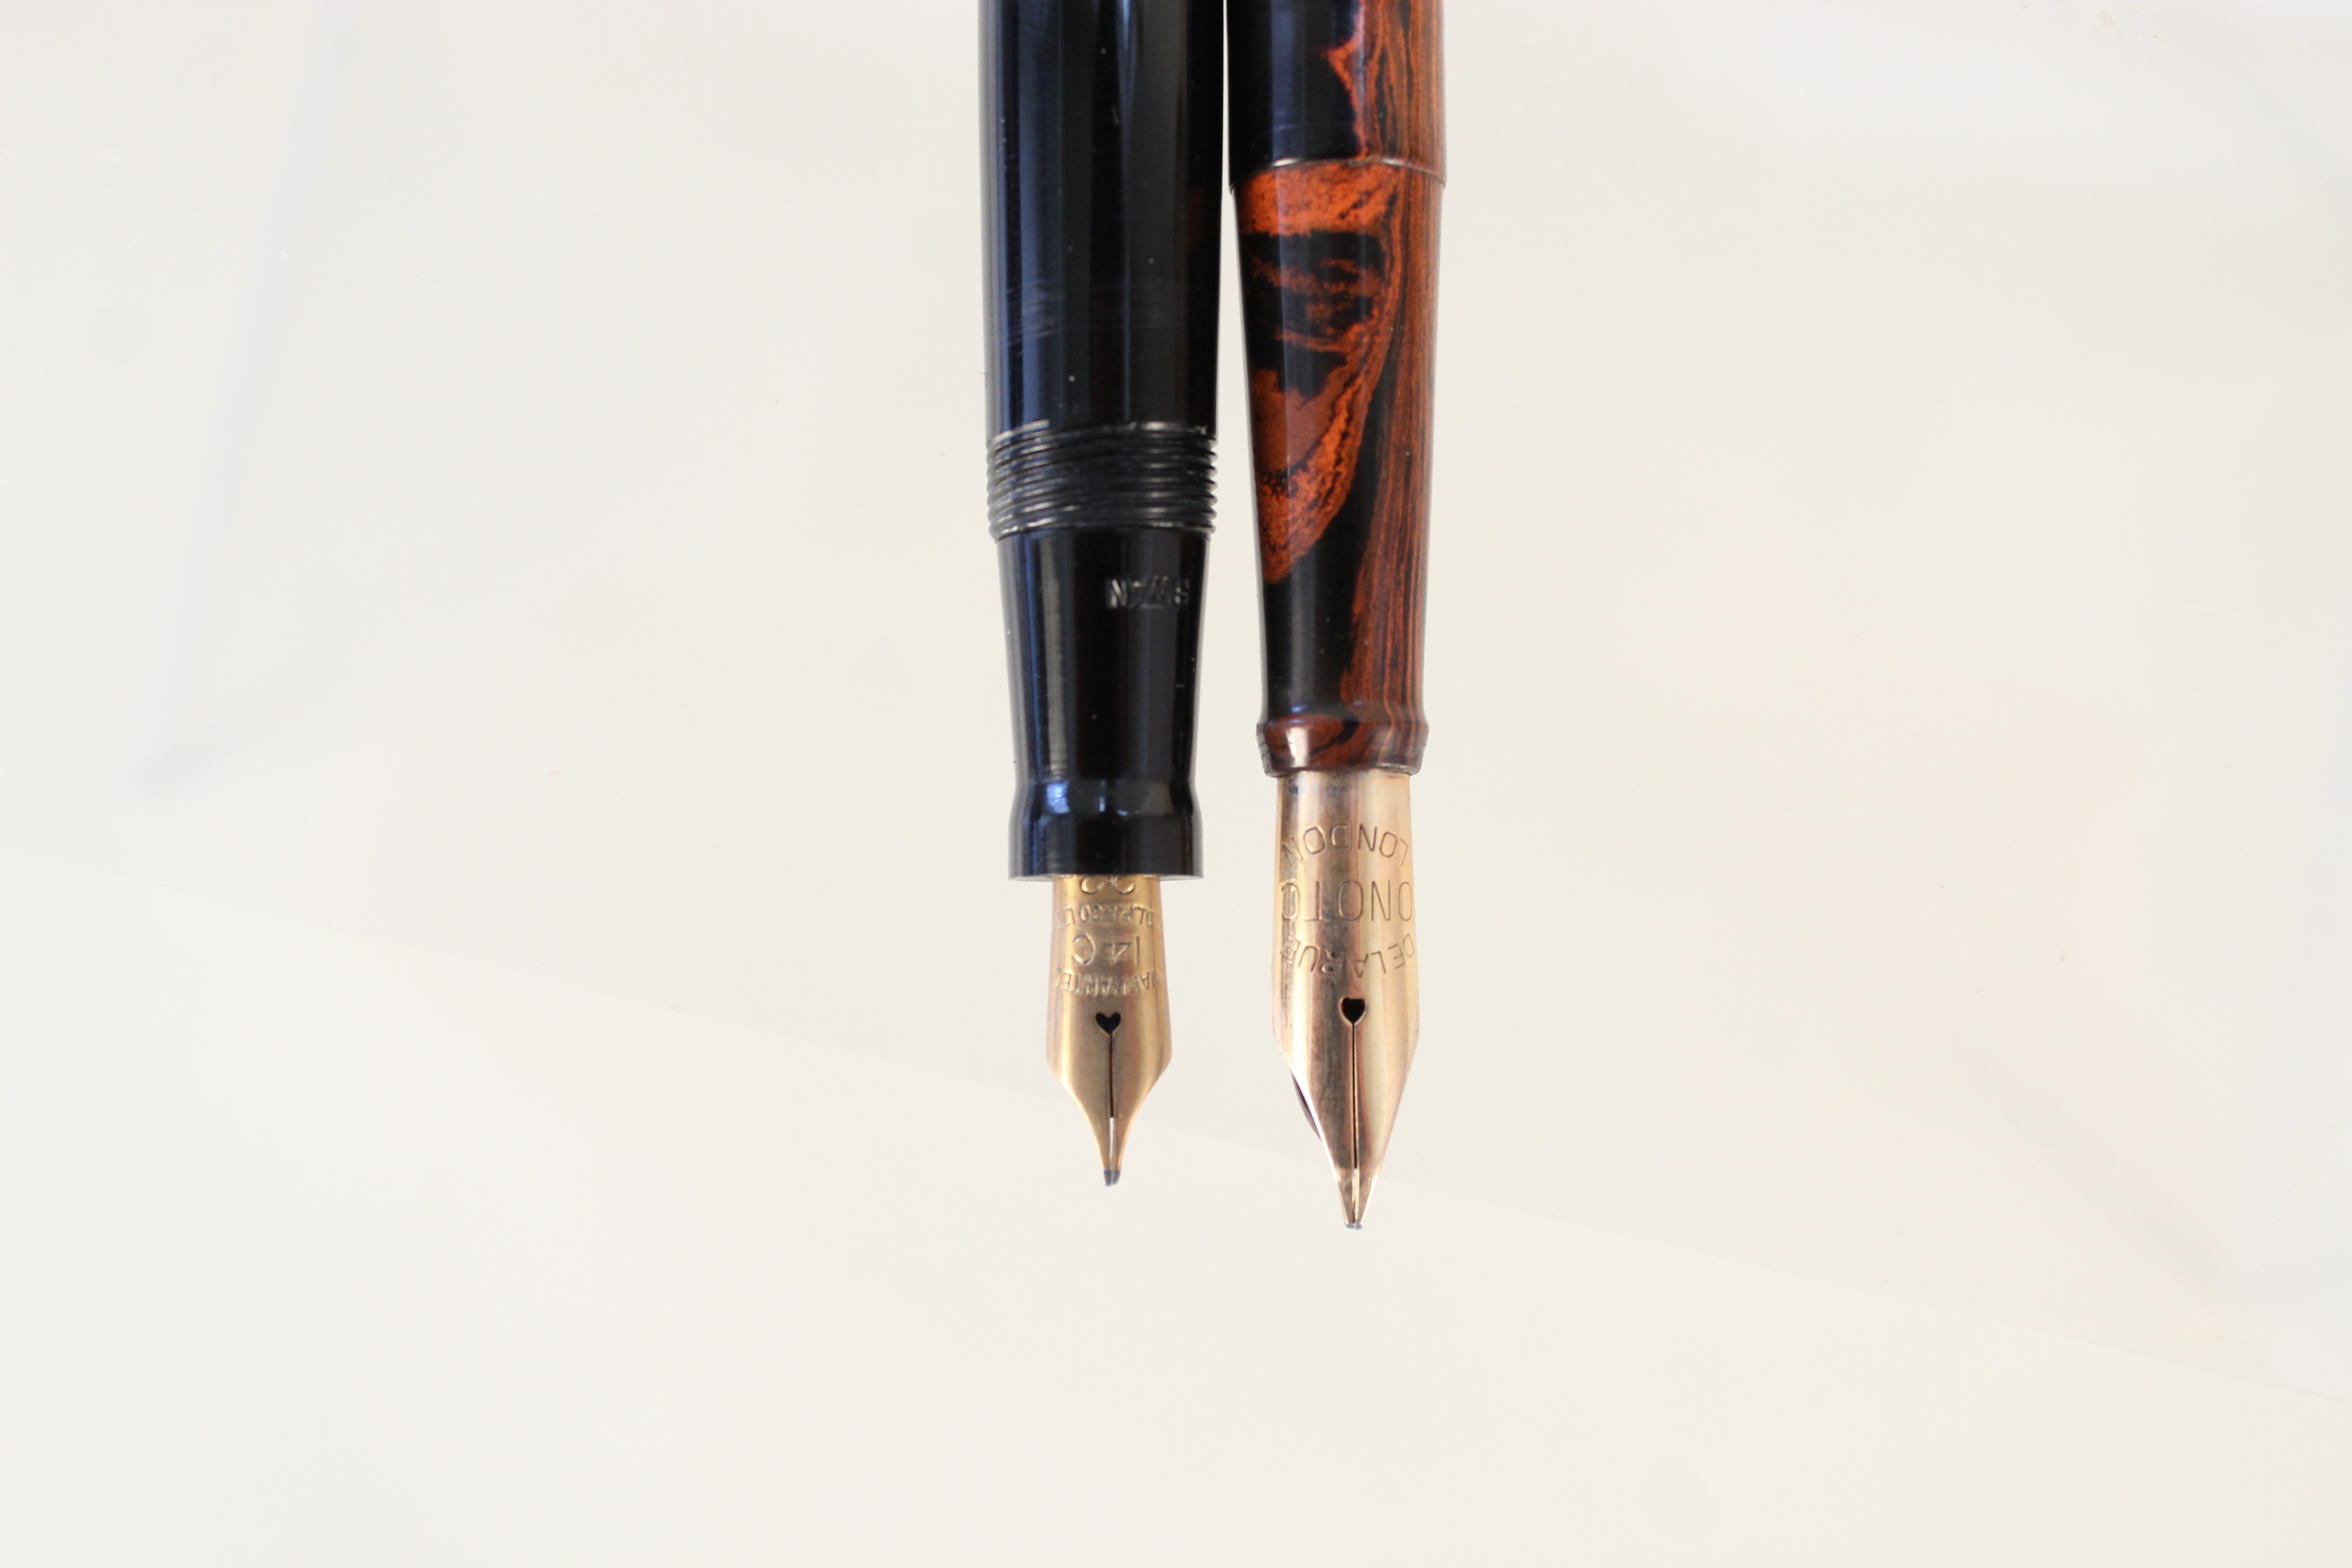 A De La Rue "Unoto" of London ink pen together with a Swan self filler with 14ct gold nibs - Image 2 of 3